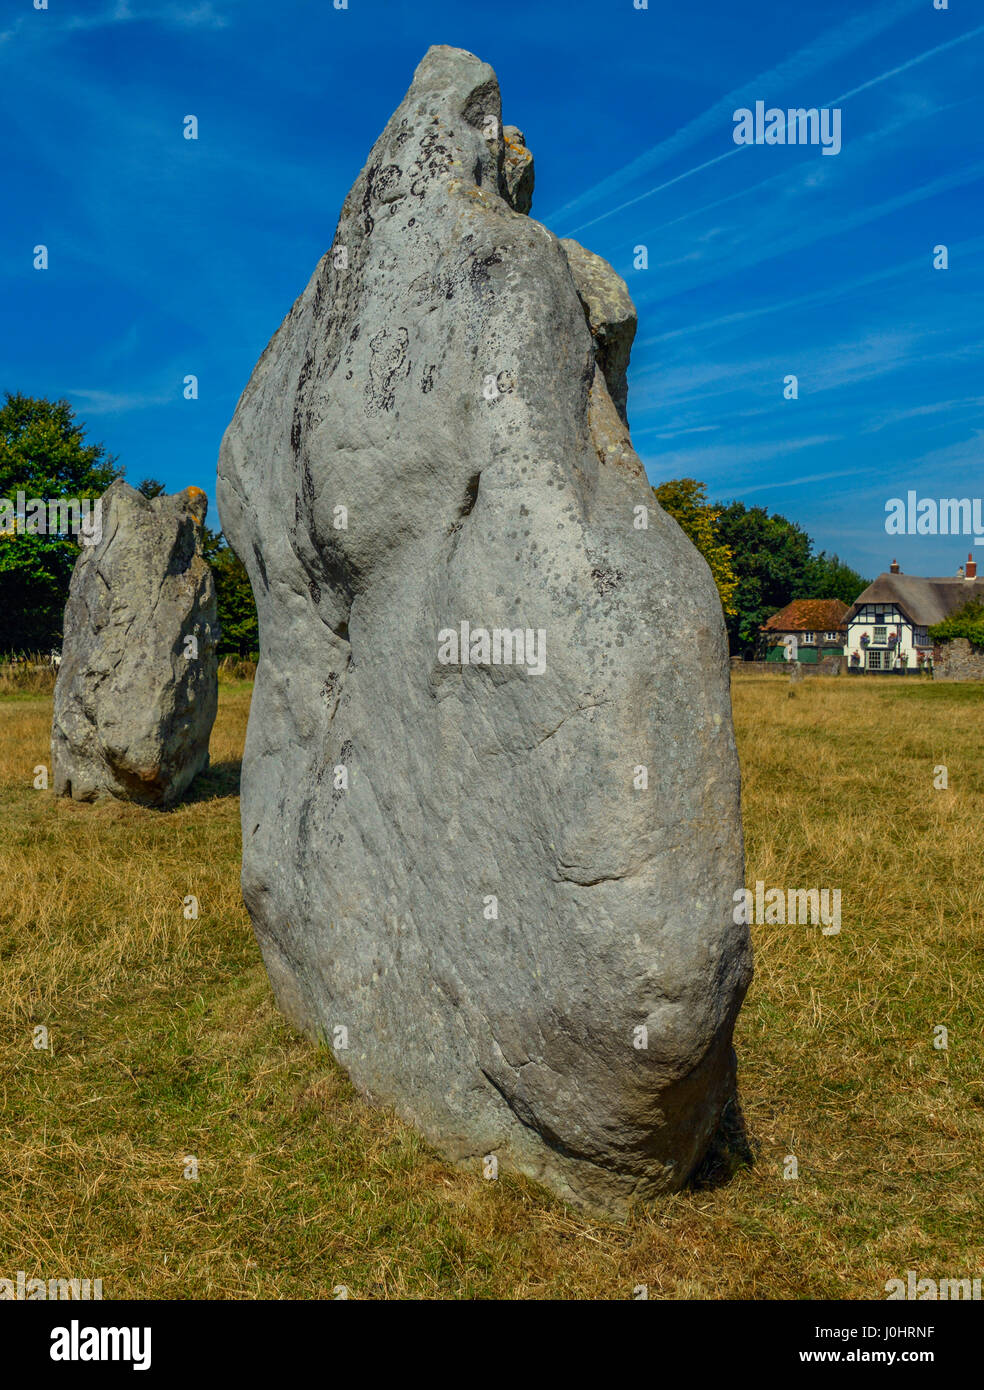 A portrait view of a neolithic standing stone at the stone circle of Avebury, in Wiltshire, UK. Stock Photo